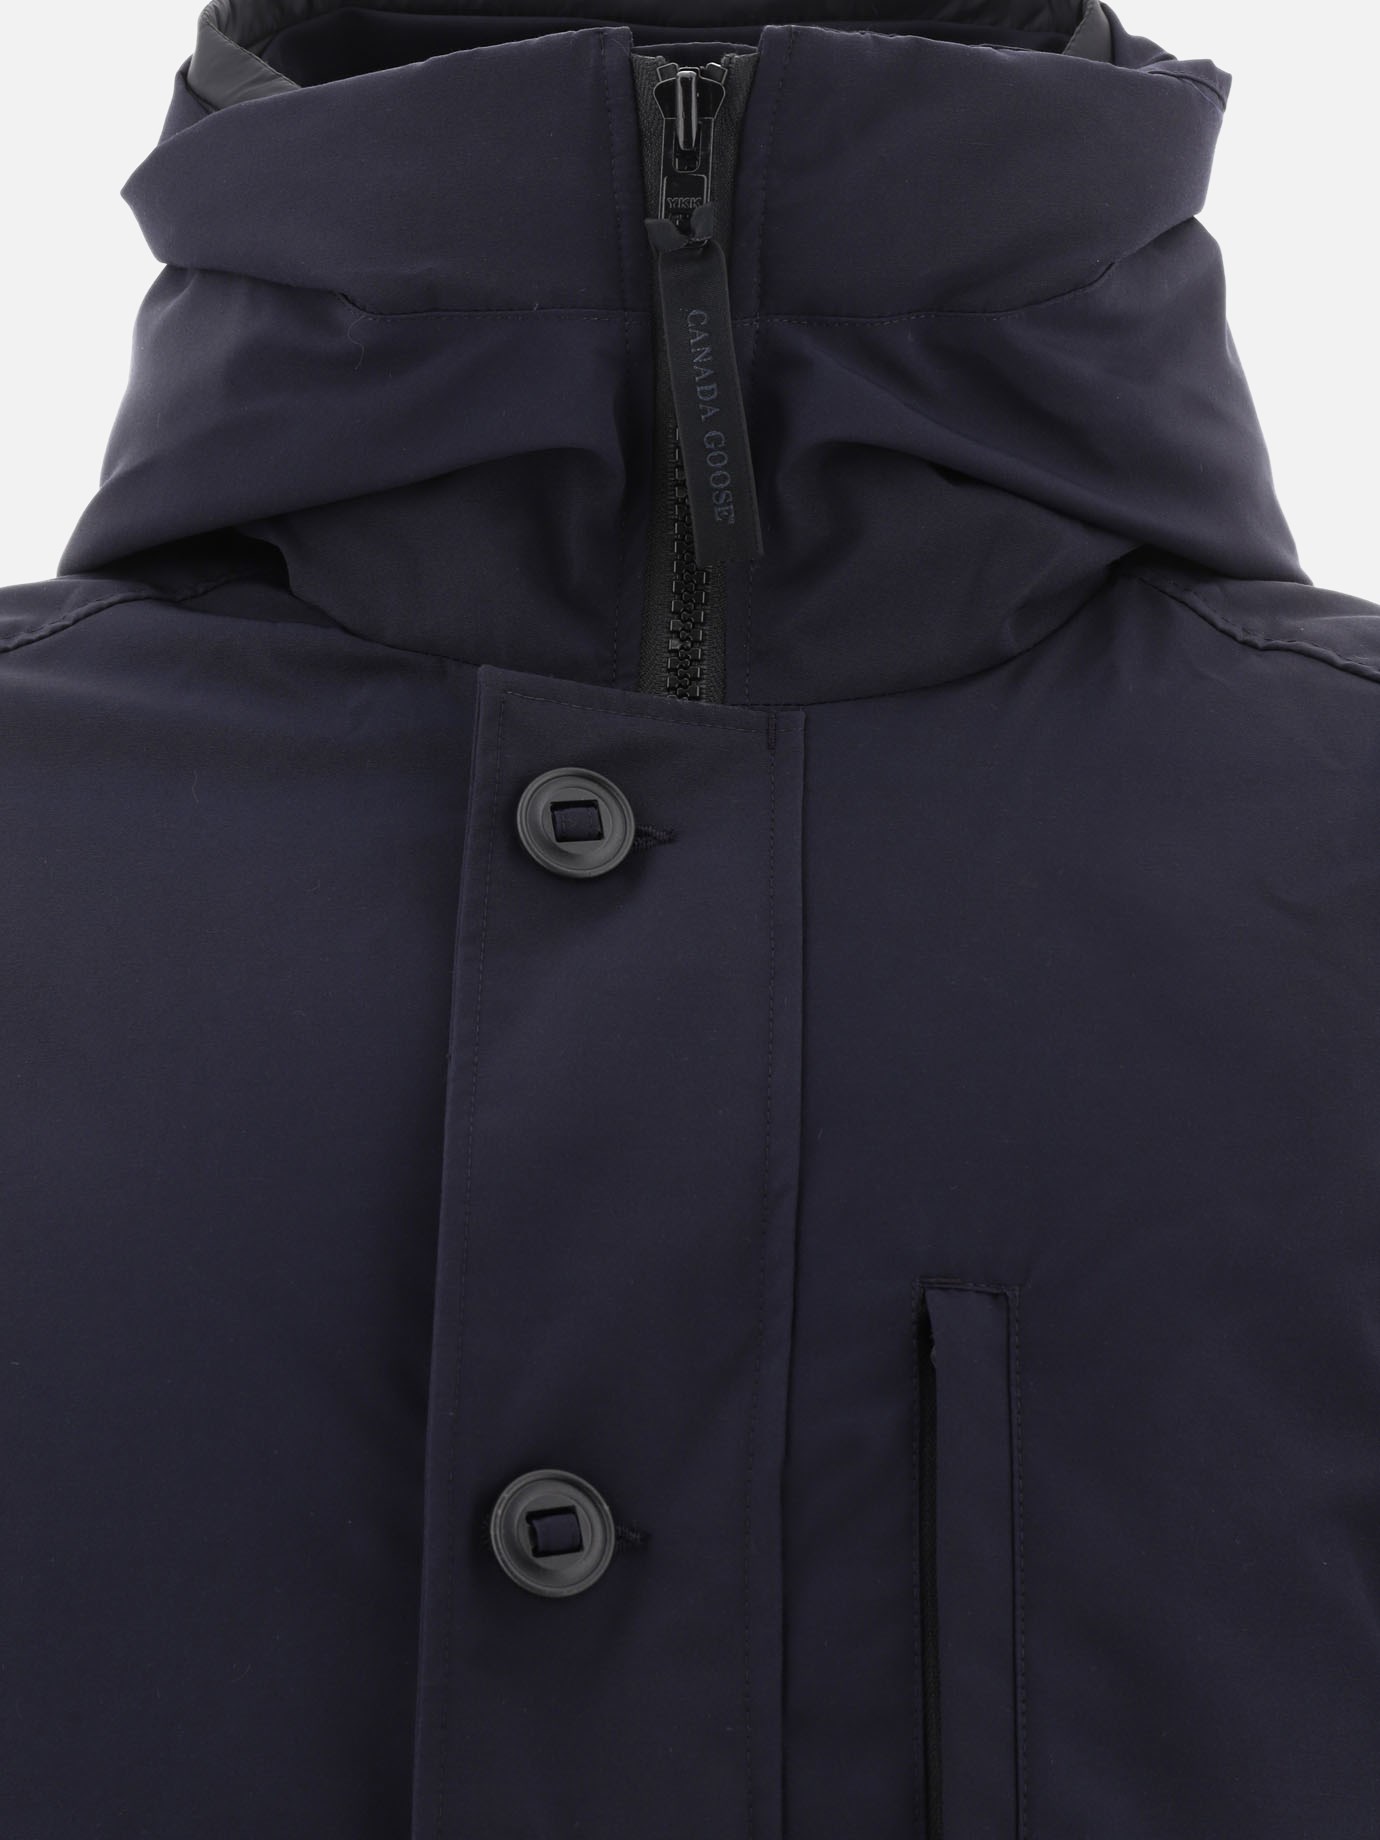 Parka  Chateau Black Label  by Canada Goose